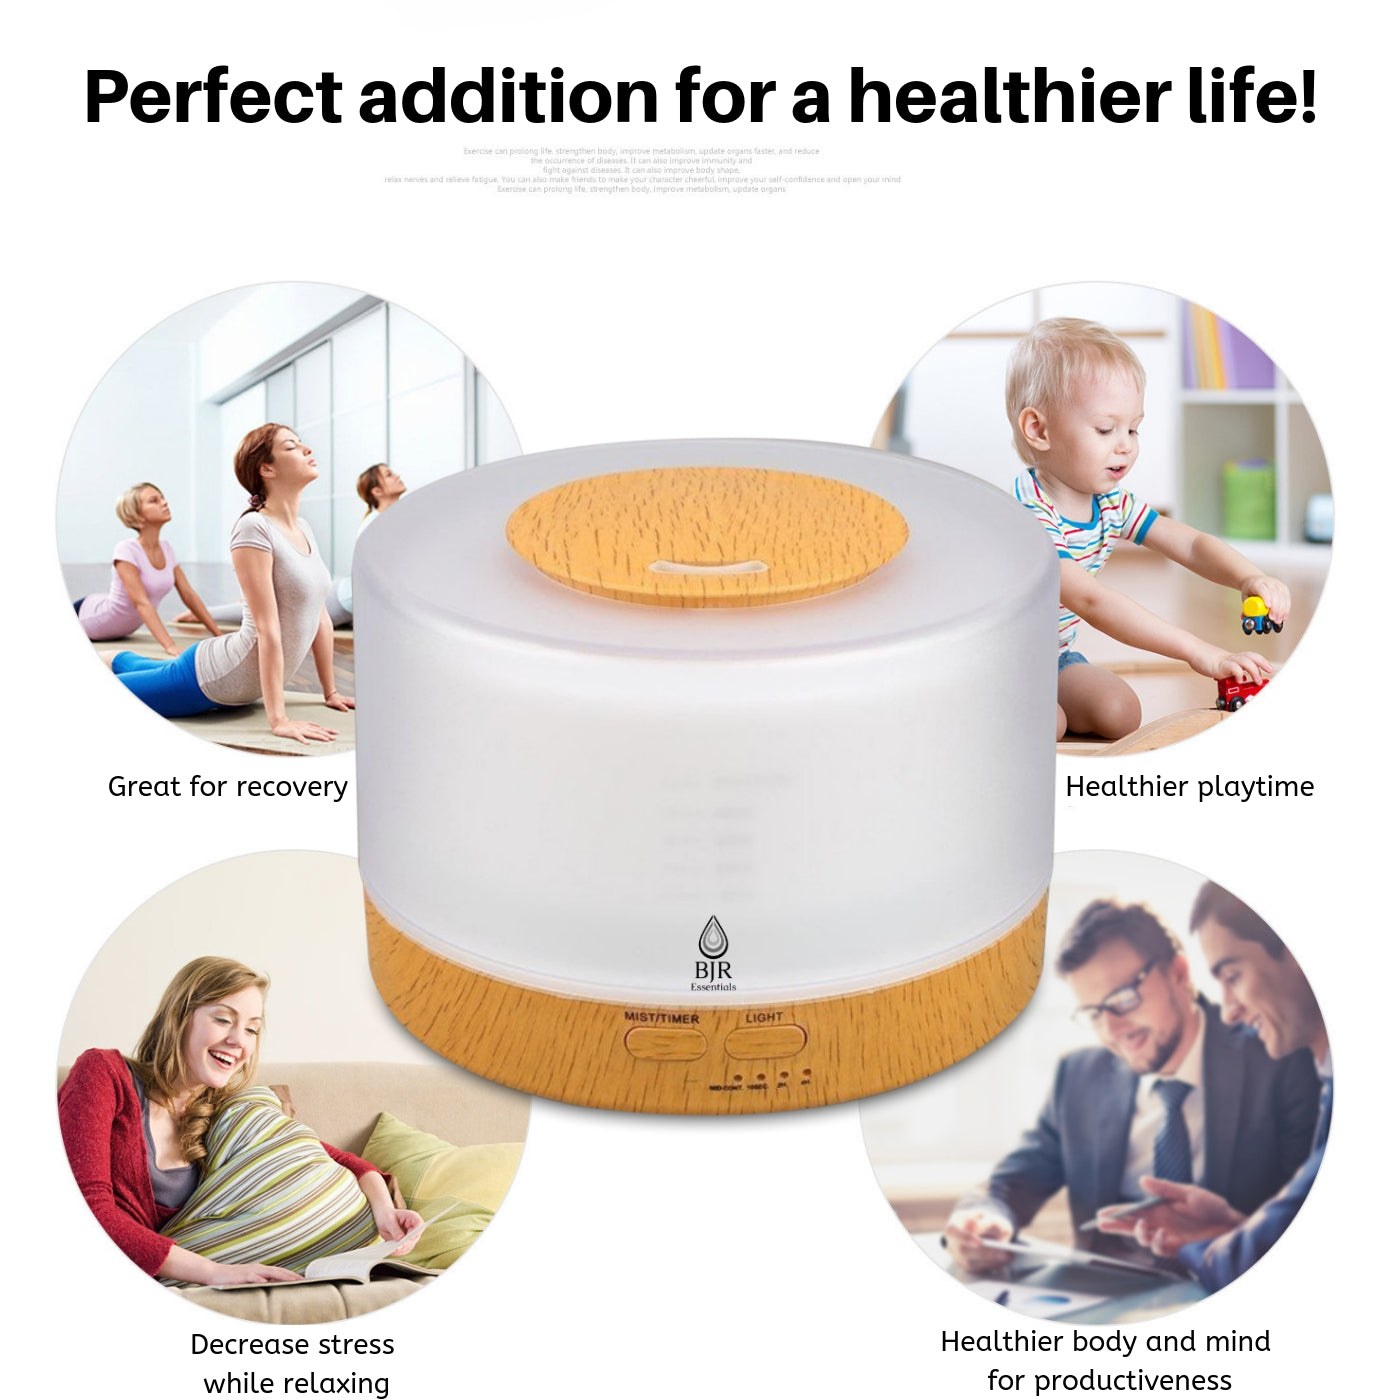 BJR Essentials 500ml Premium, Essential Oil Diffuser, 5 in 1 Ultrasonic Aromatherapy Fragrant Oil Vaporizer Humidifier, Ultra Quiet With Timer and Auto-Off Safety Switch, Changeable And Selective 7 LED Light Colours, All Settings Responsive To REMOTE!